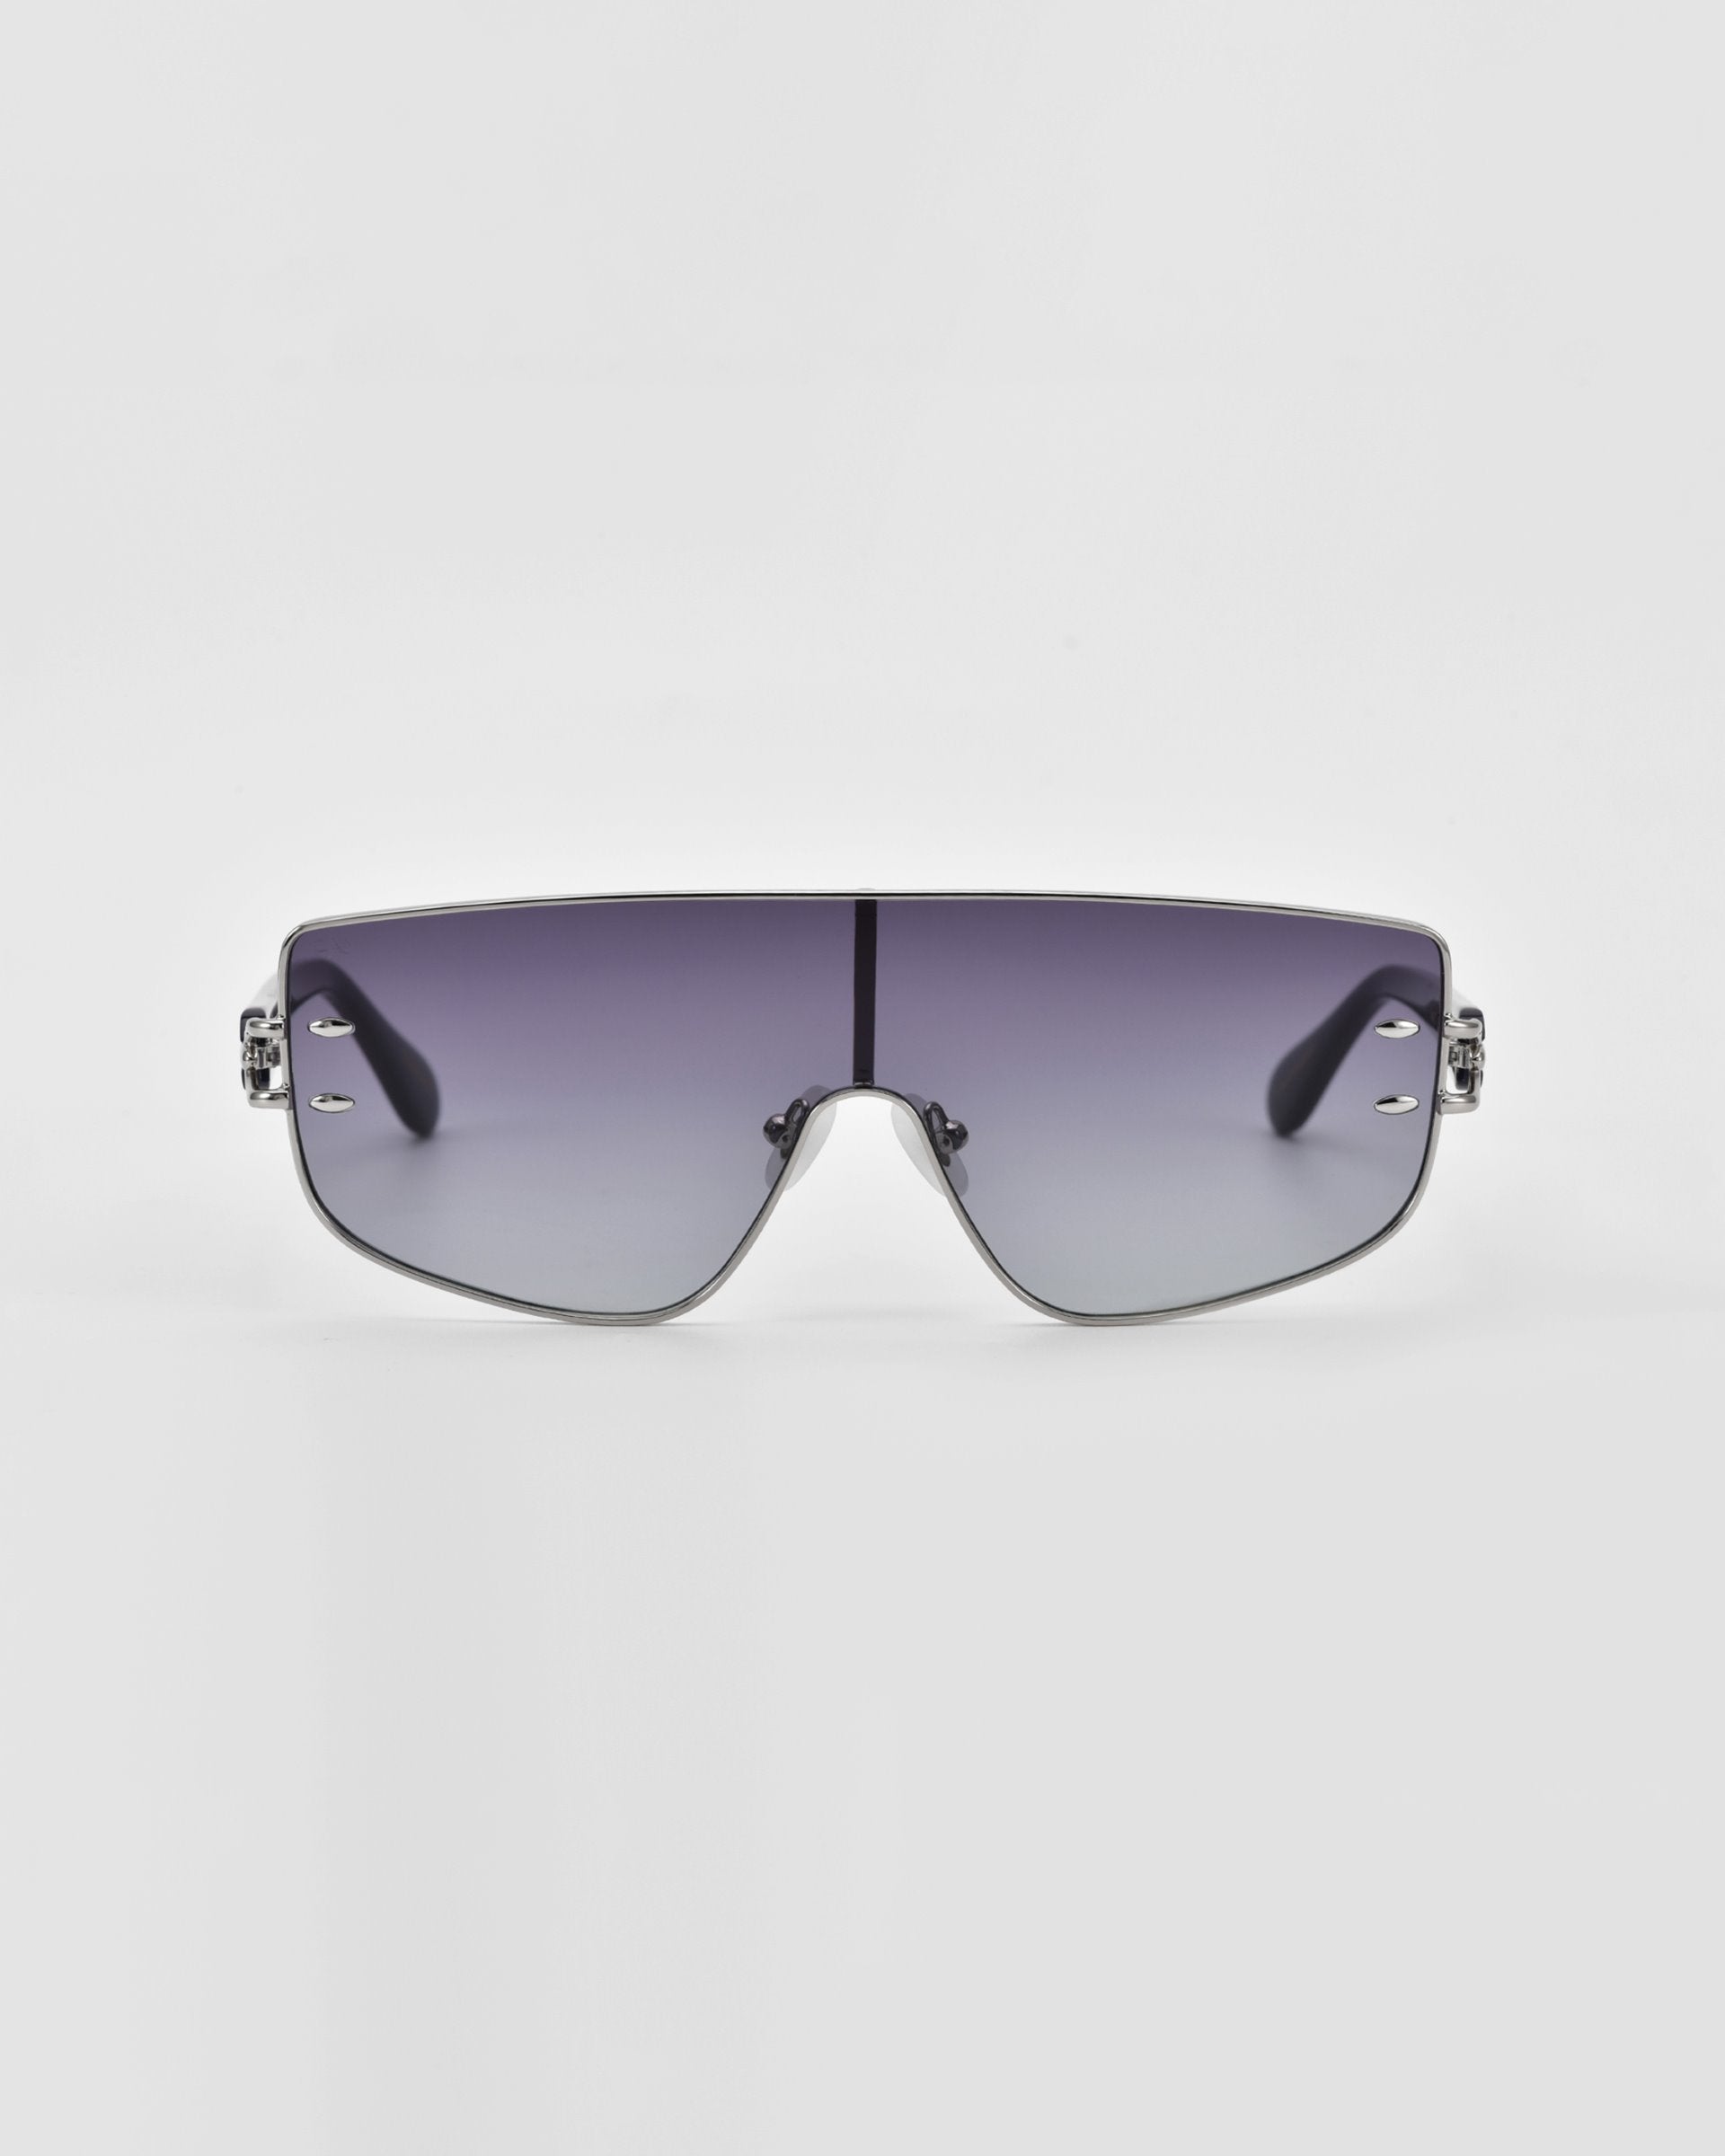 A pair of stylish, oversized For Art&#39;s Sake® Flare sunglasses with a silver frame and gradient lenses. The lenses transition from dark at the top to lighter at the bottom, and the frame has minimalistic, sleek detailing. This luxury eyewear piece stands out against a plain white background with its futuristic design.